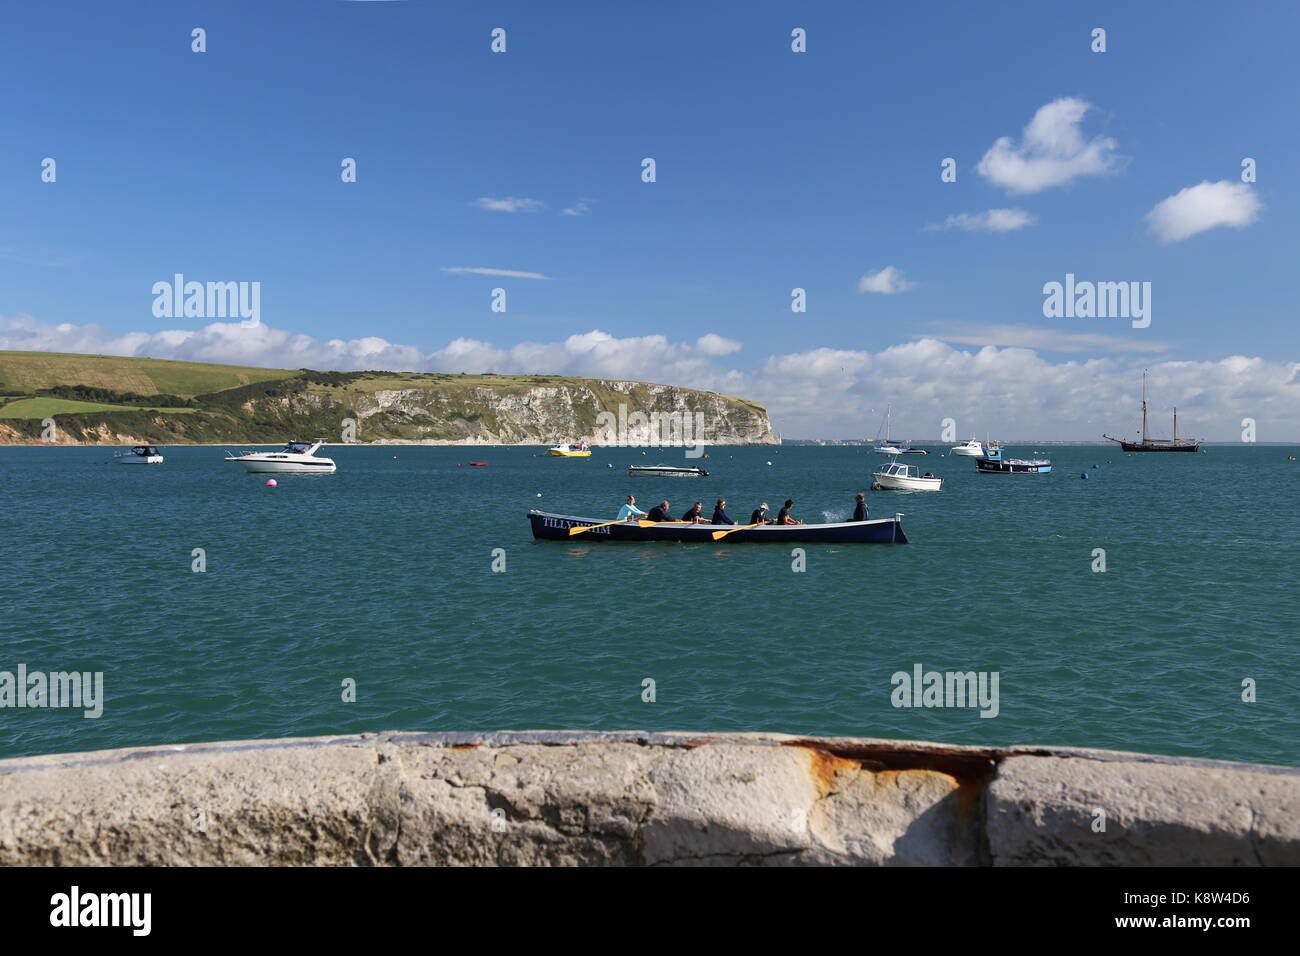 Swanage Meer rudern Club" Tilly Laune 'Pilot Gig in Swanage Bay, Swanage, Isle of Purbeck, Dorset, England, Großbritannien, USA, UK, Europa Stockfoto